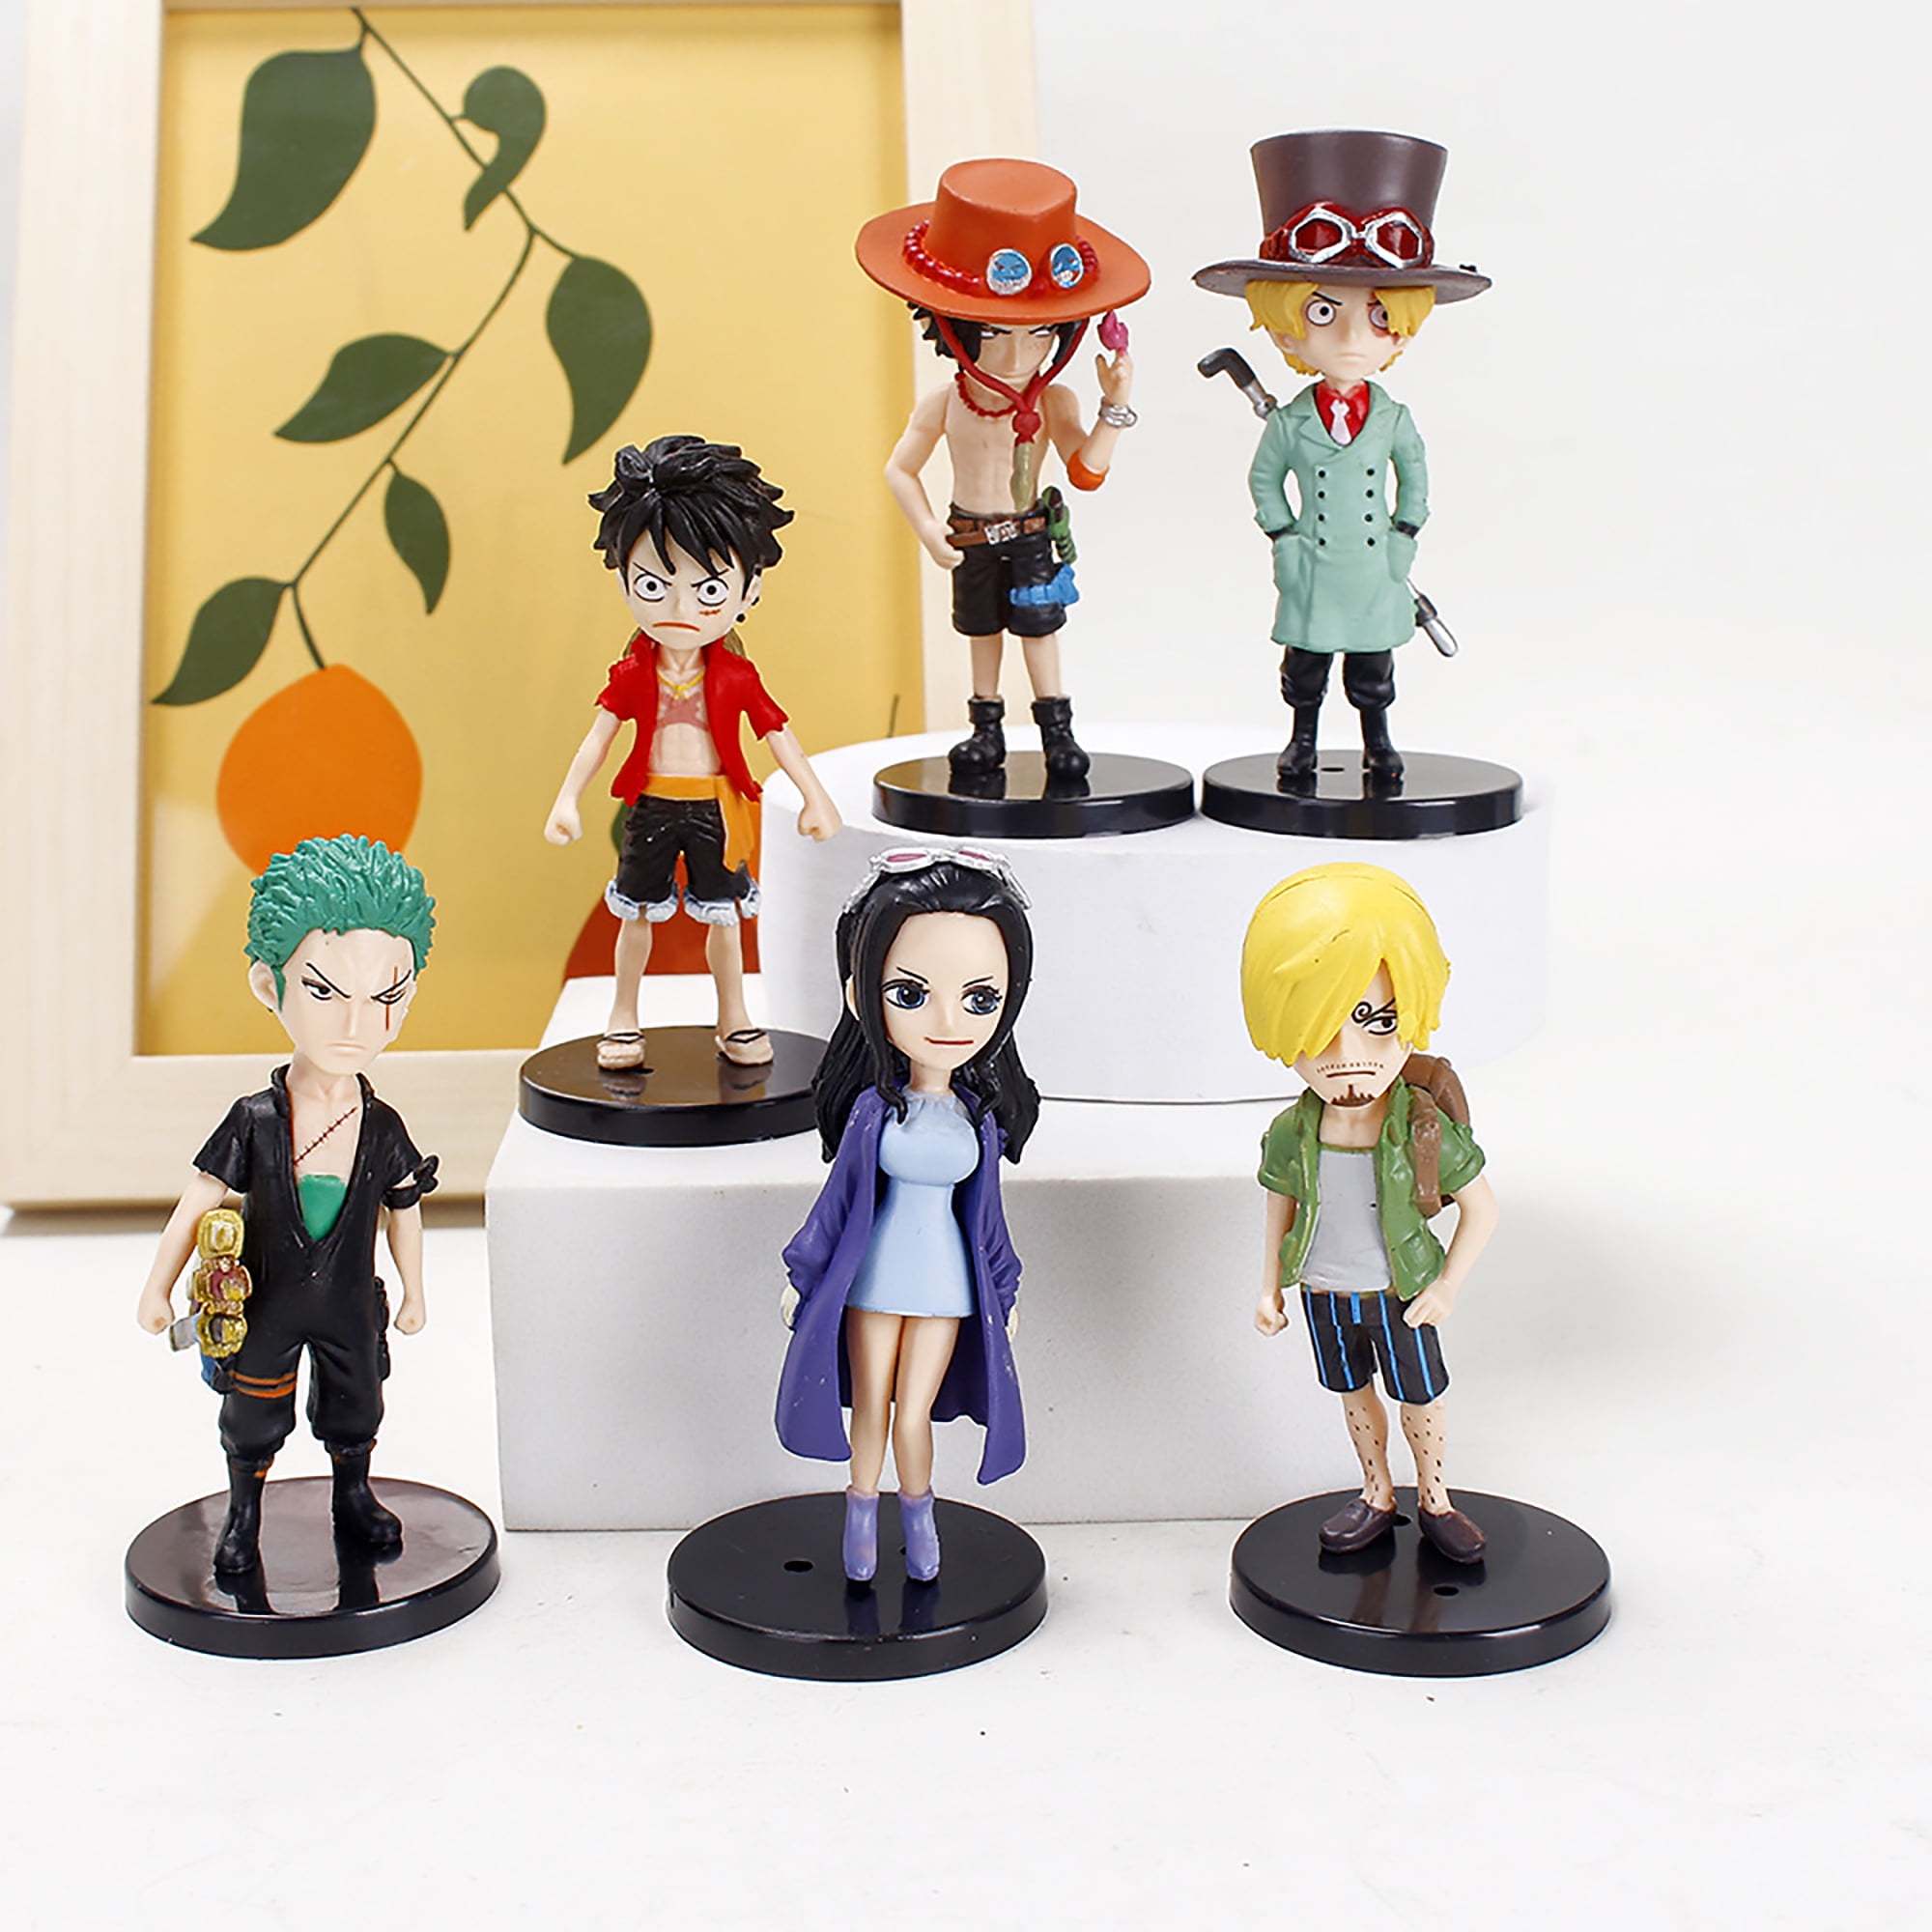 Anime Ornament Anime Ornaments Makes the Perfect Anime Gift - Etsy